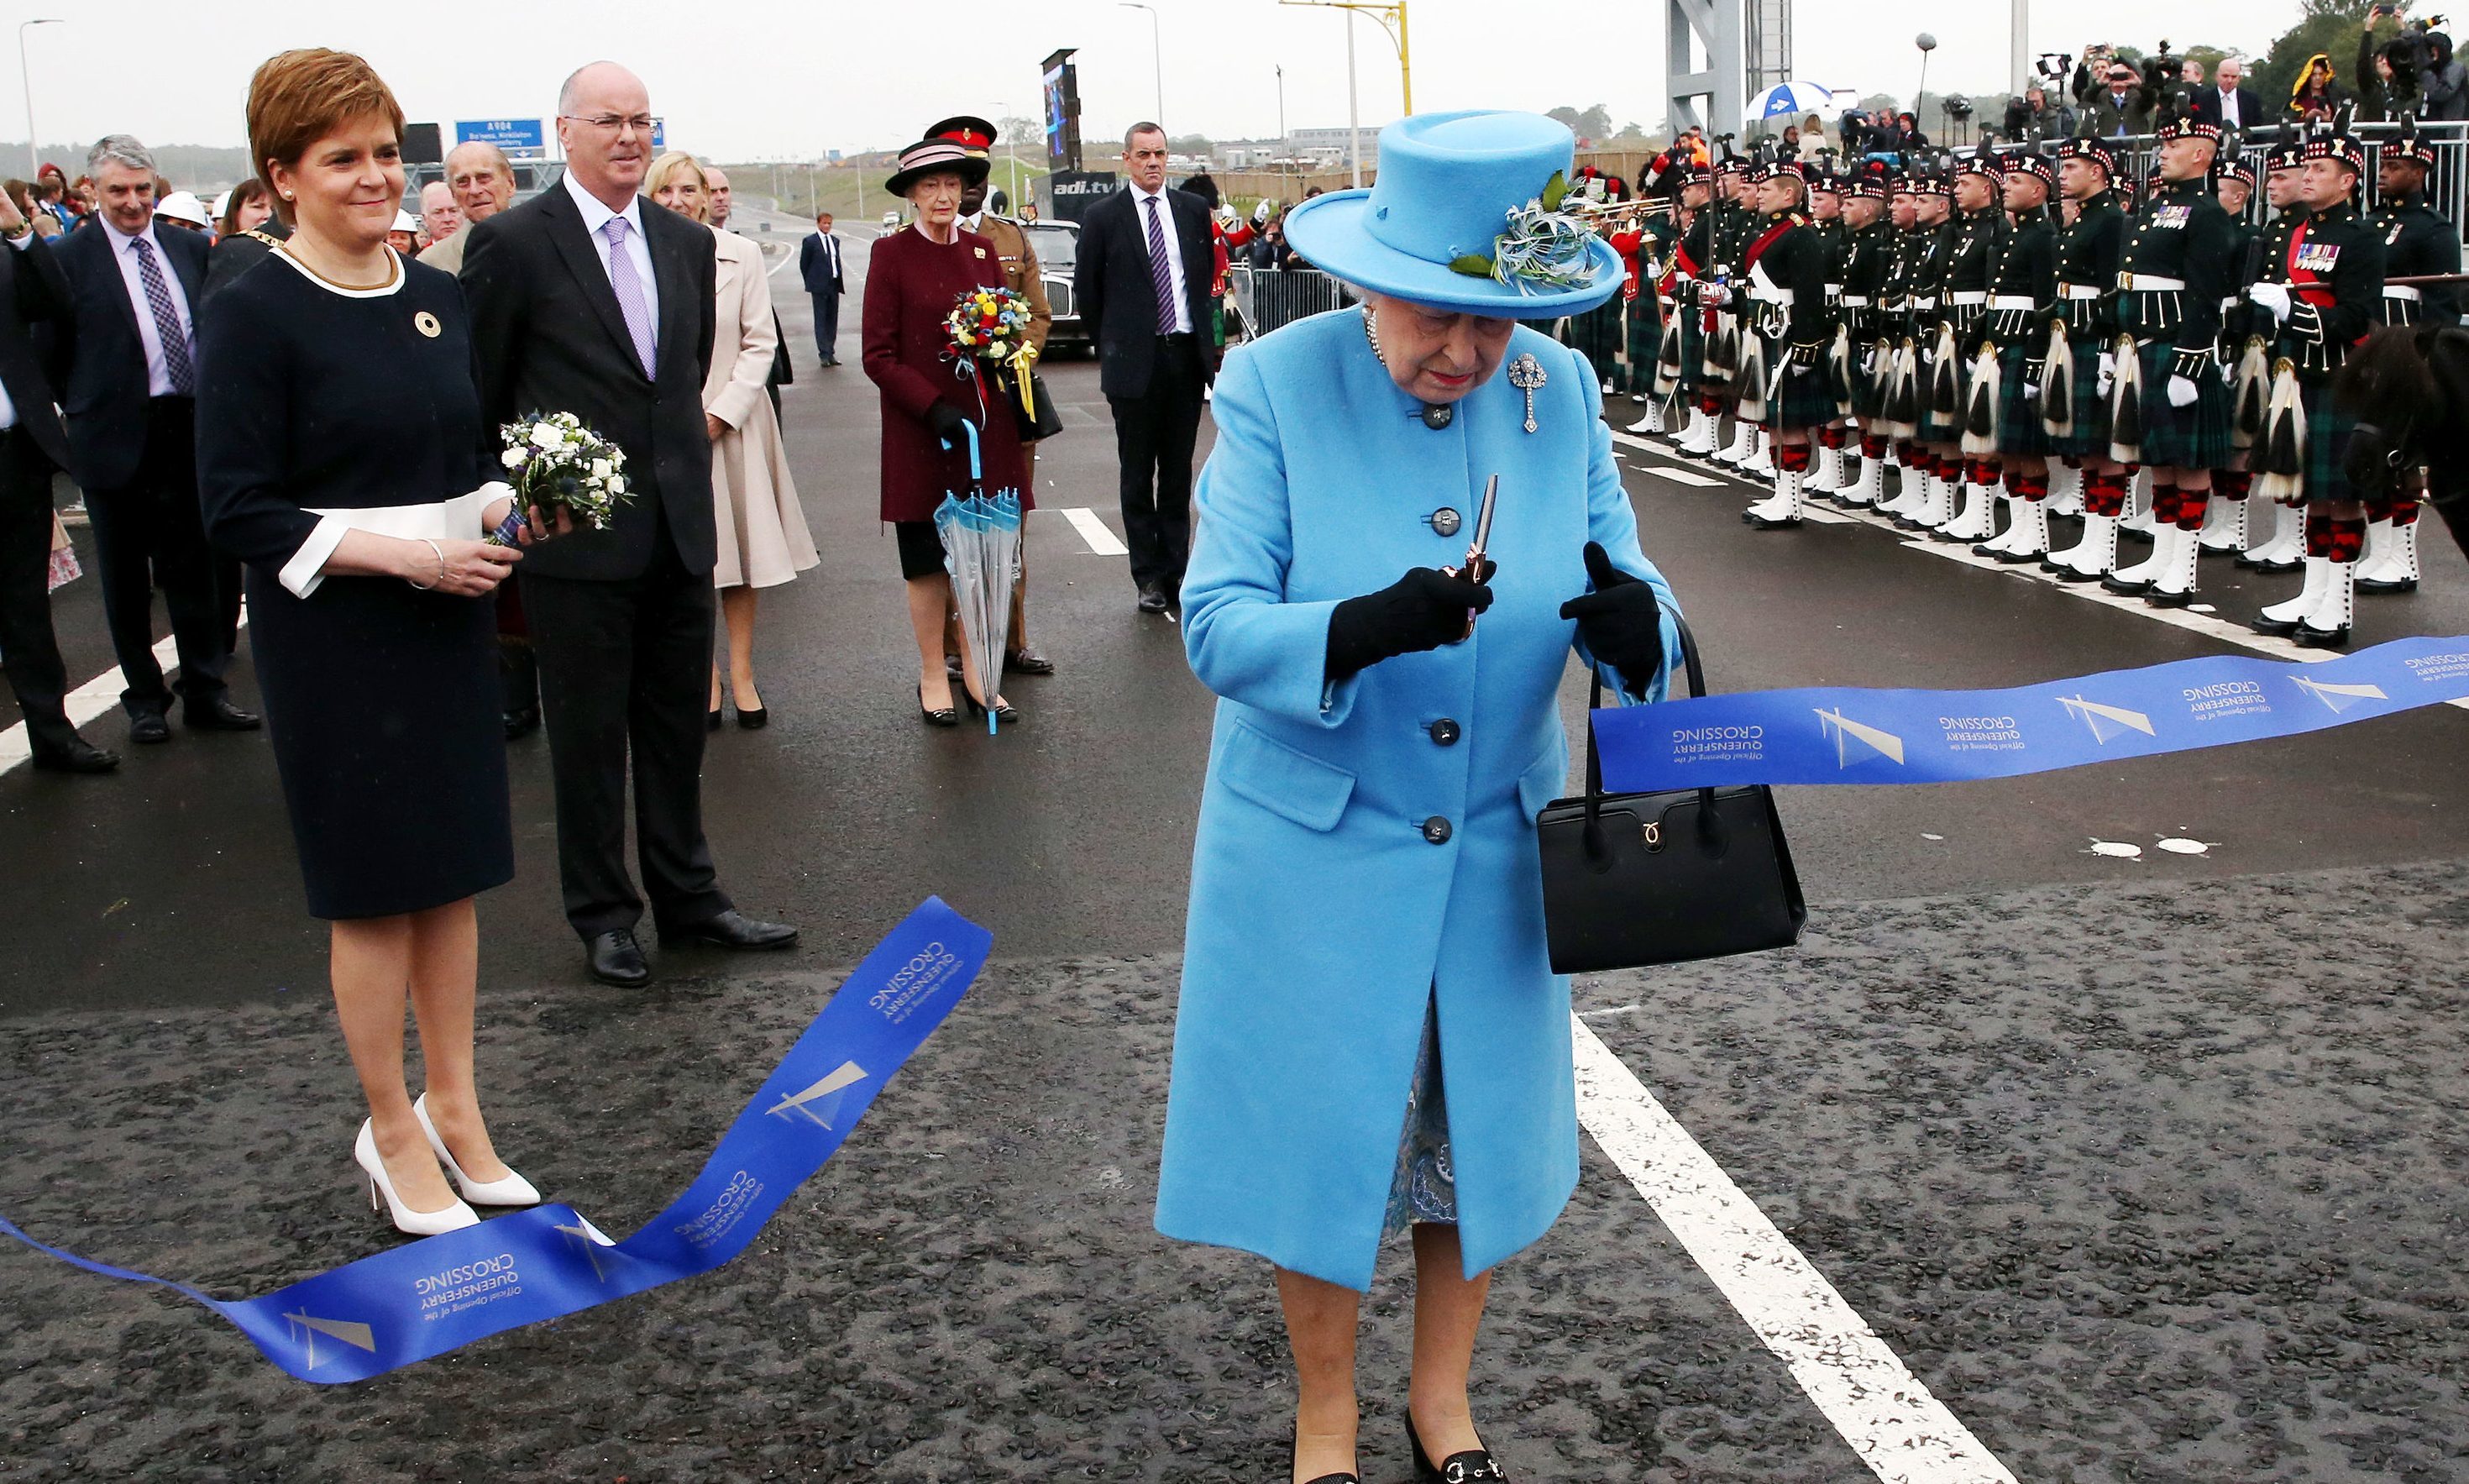 The Queen officially opens the Queensferry Crossing as First Minister Nicola Sturgeon looks on.